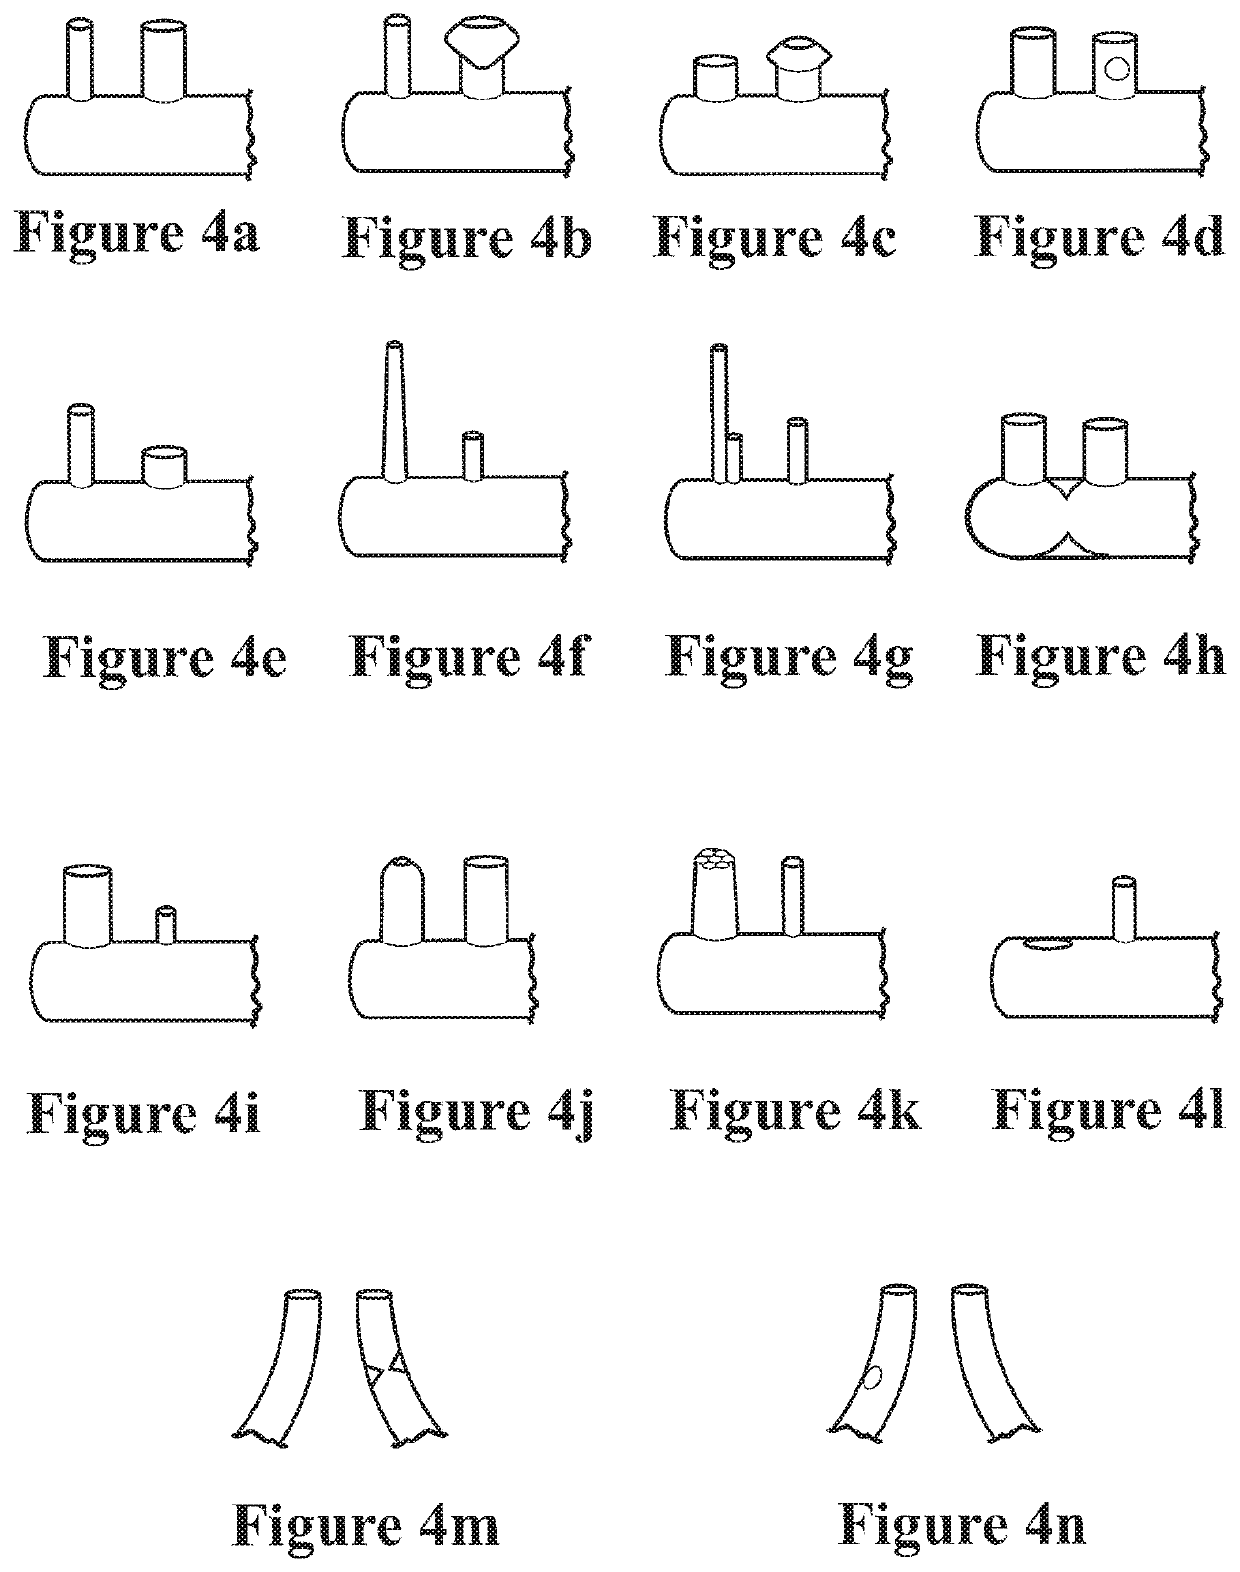 Asymmetrical nasal delivery elements and fittings for nasal interfaces